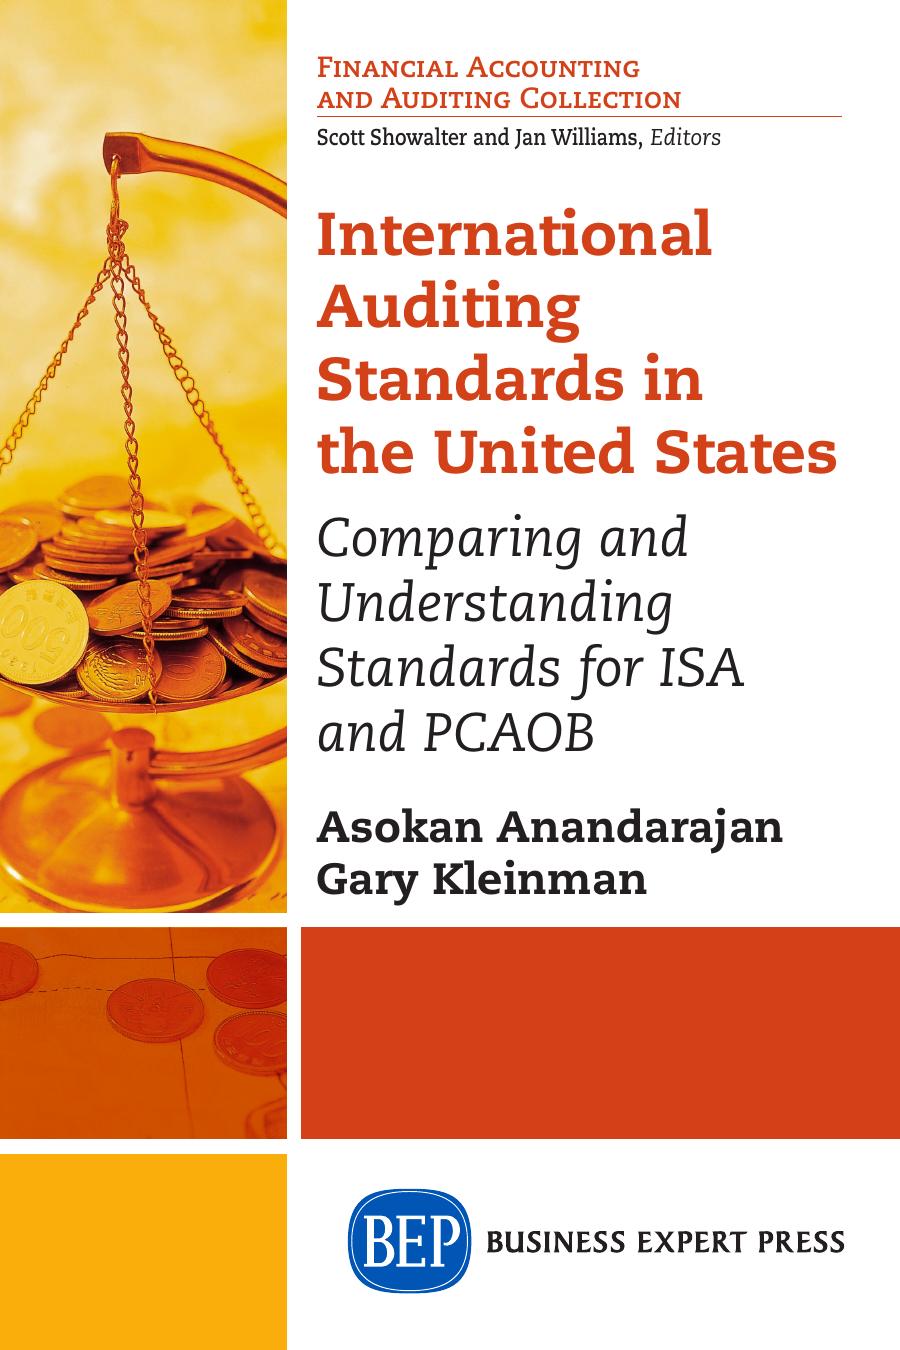 International auditing standards in the United States comparing and understanding standards for ISA and PCAOB ( PDFDrive )(1)